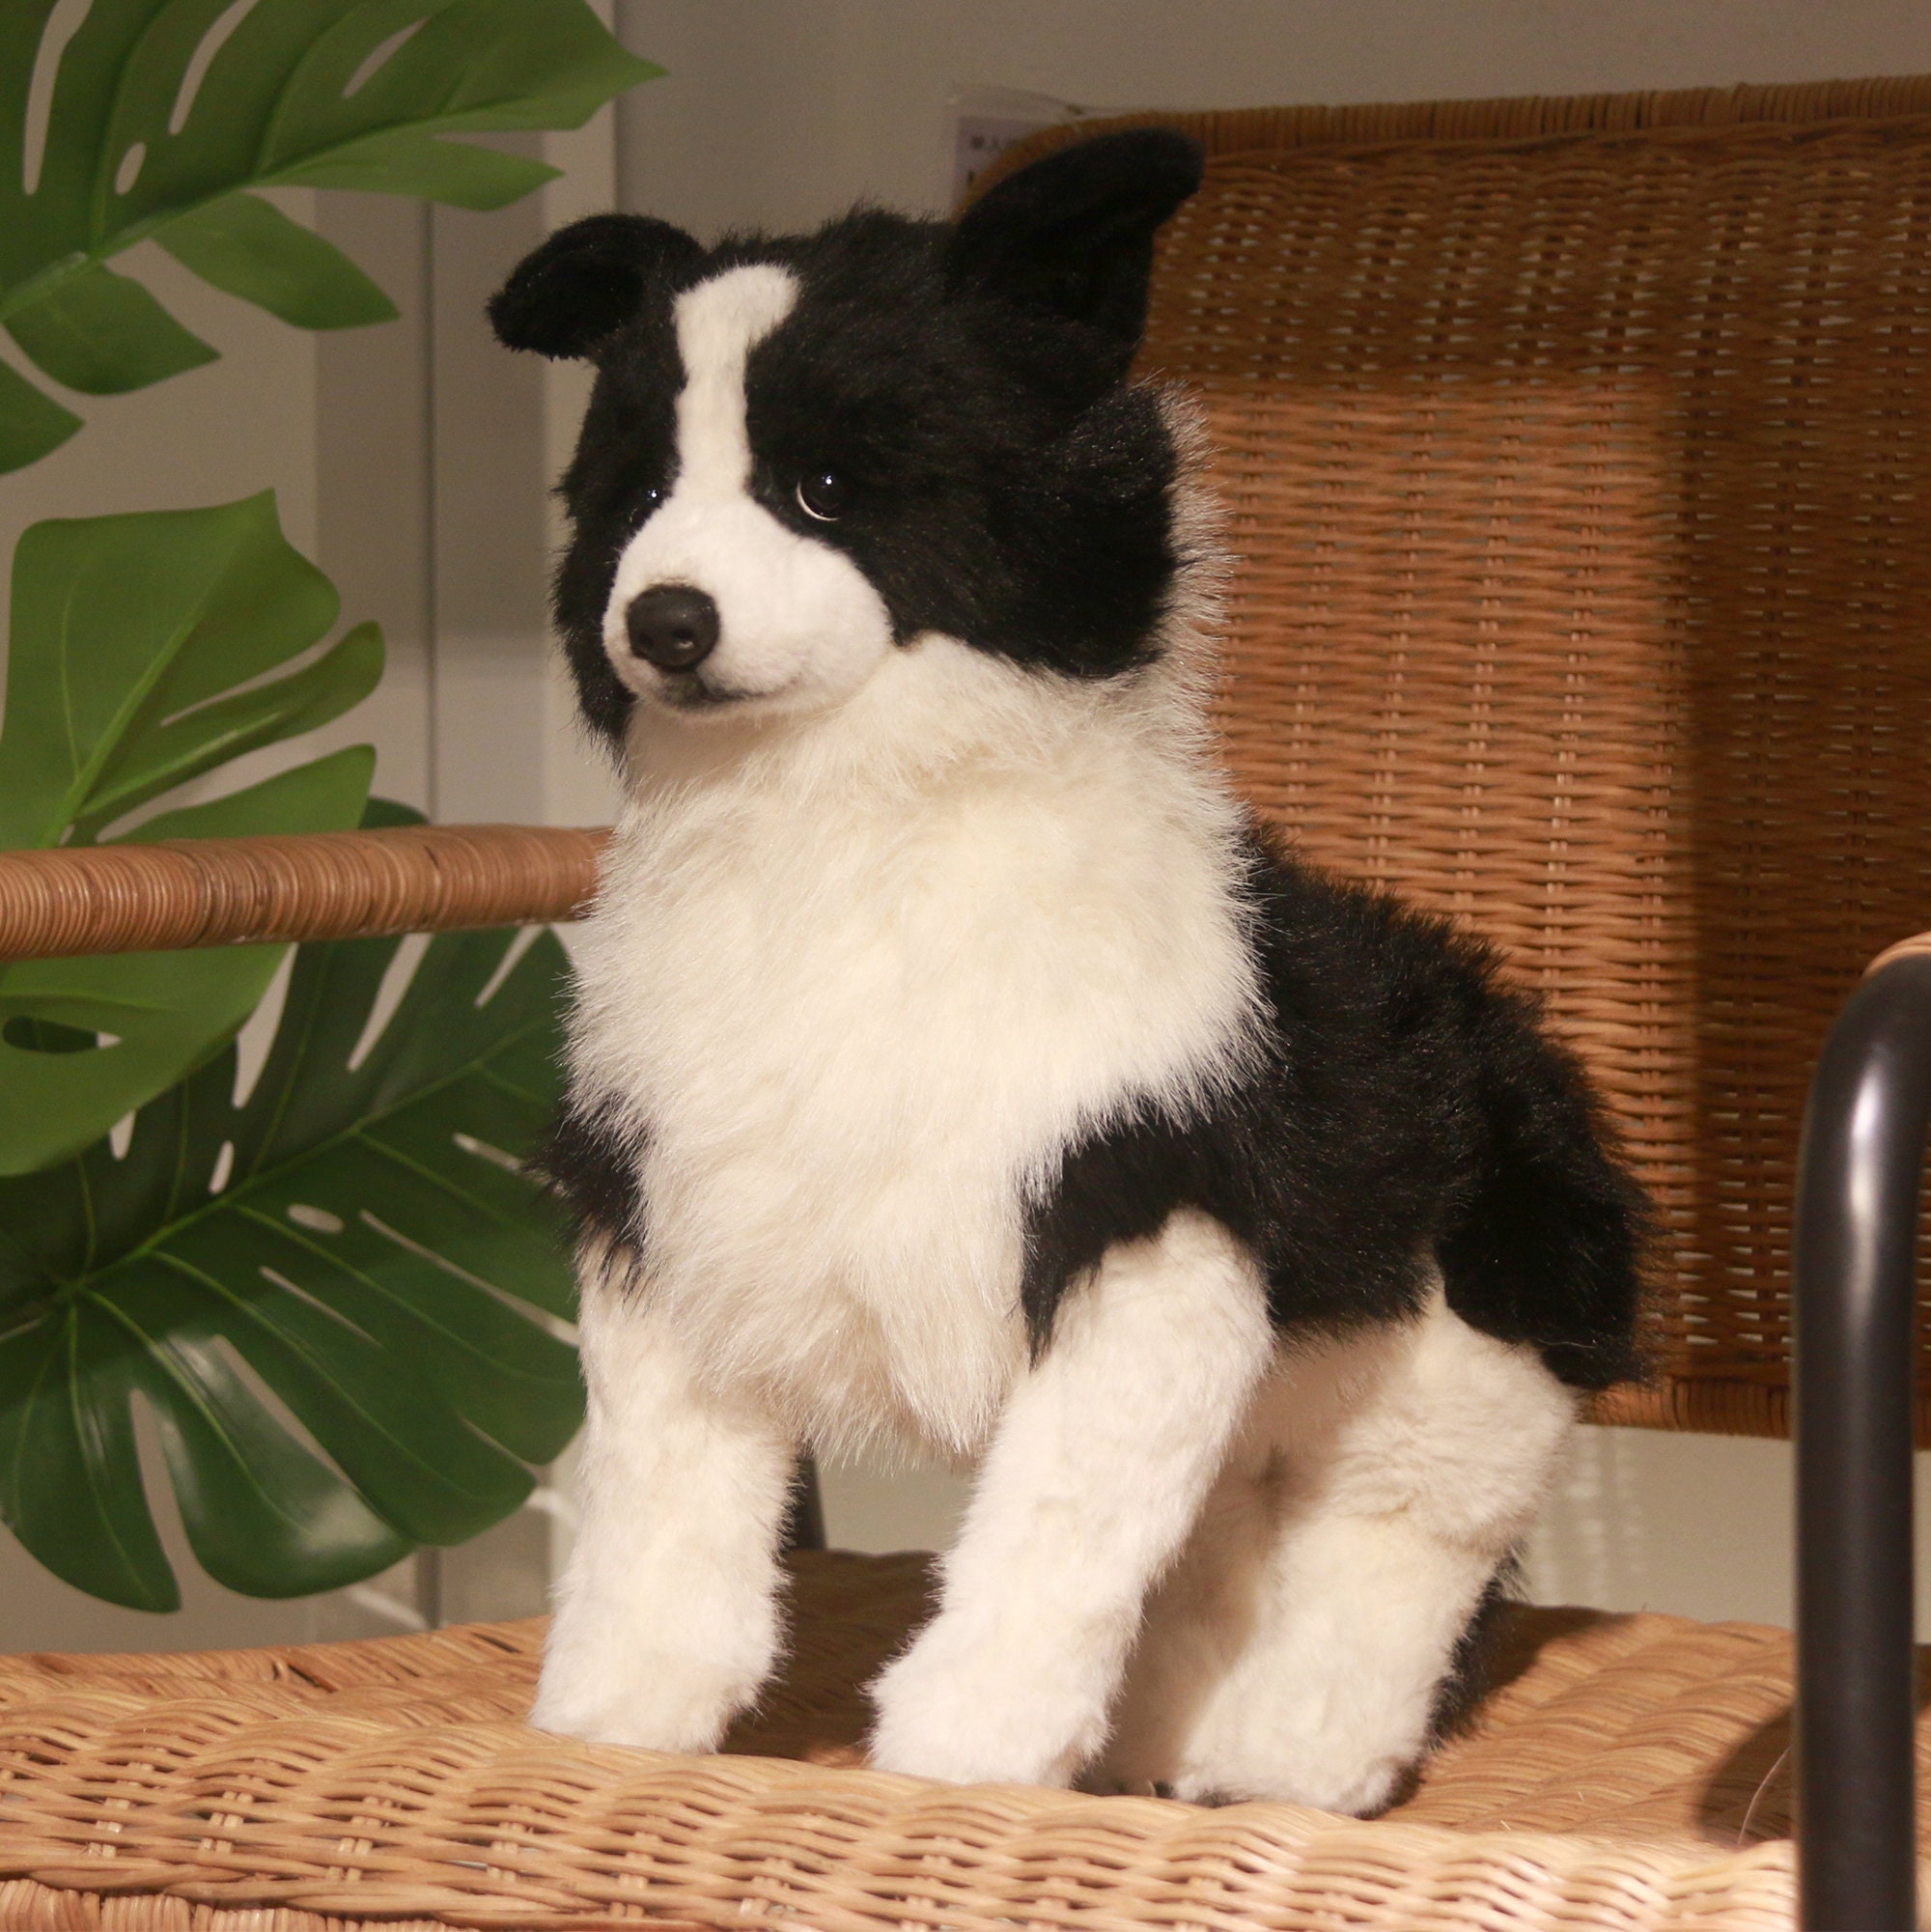 Border Collie handmade soft and cuddly realistic 12 collectable toy dog  5030717111480 on eBid United States